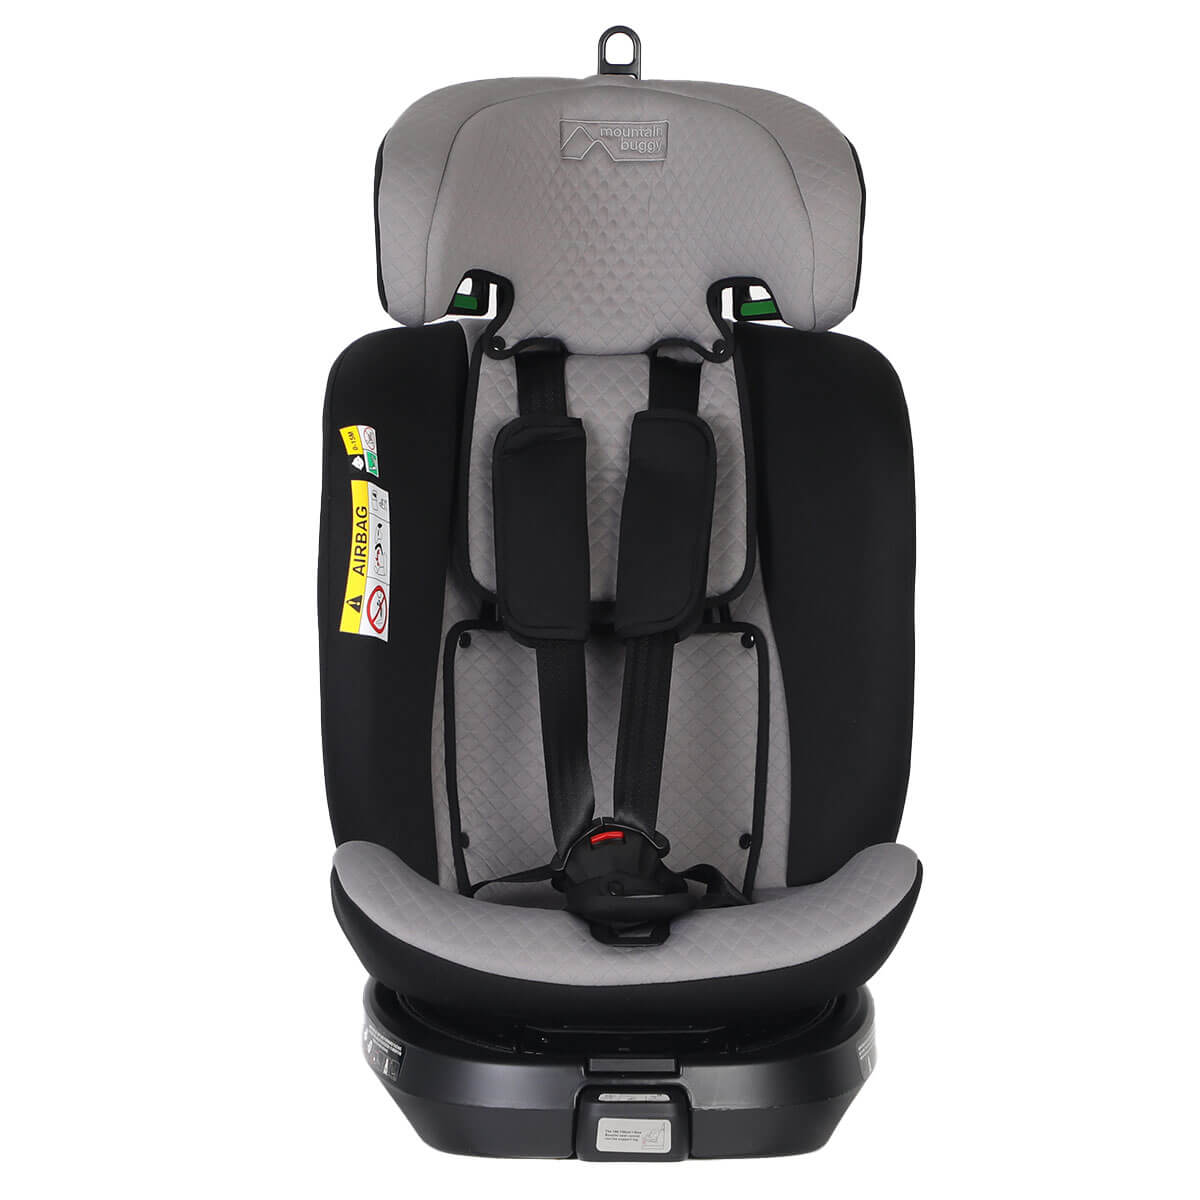 Mountain Buggy safe rotate i-size rotating car seat front view with harness